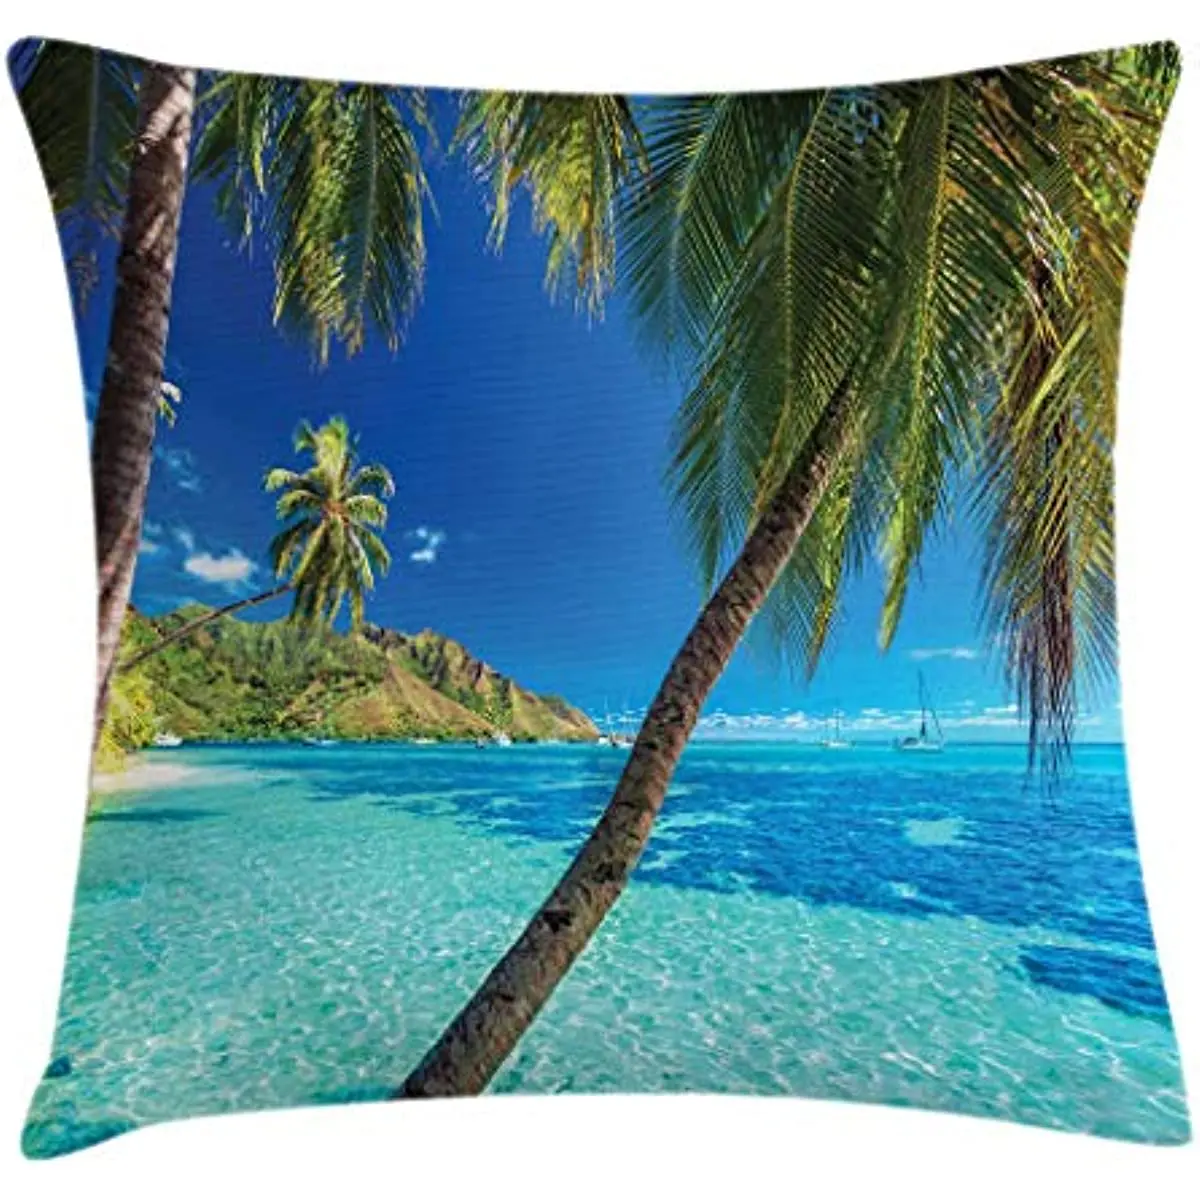 

Ocean Throw Pillow Cushion Cover, Image a Tropical Island with The Palm Trees and Clear Sea Beach Theme Print Decorative Square